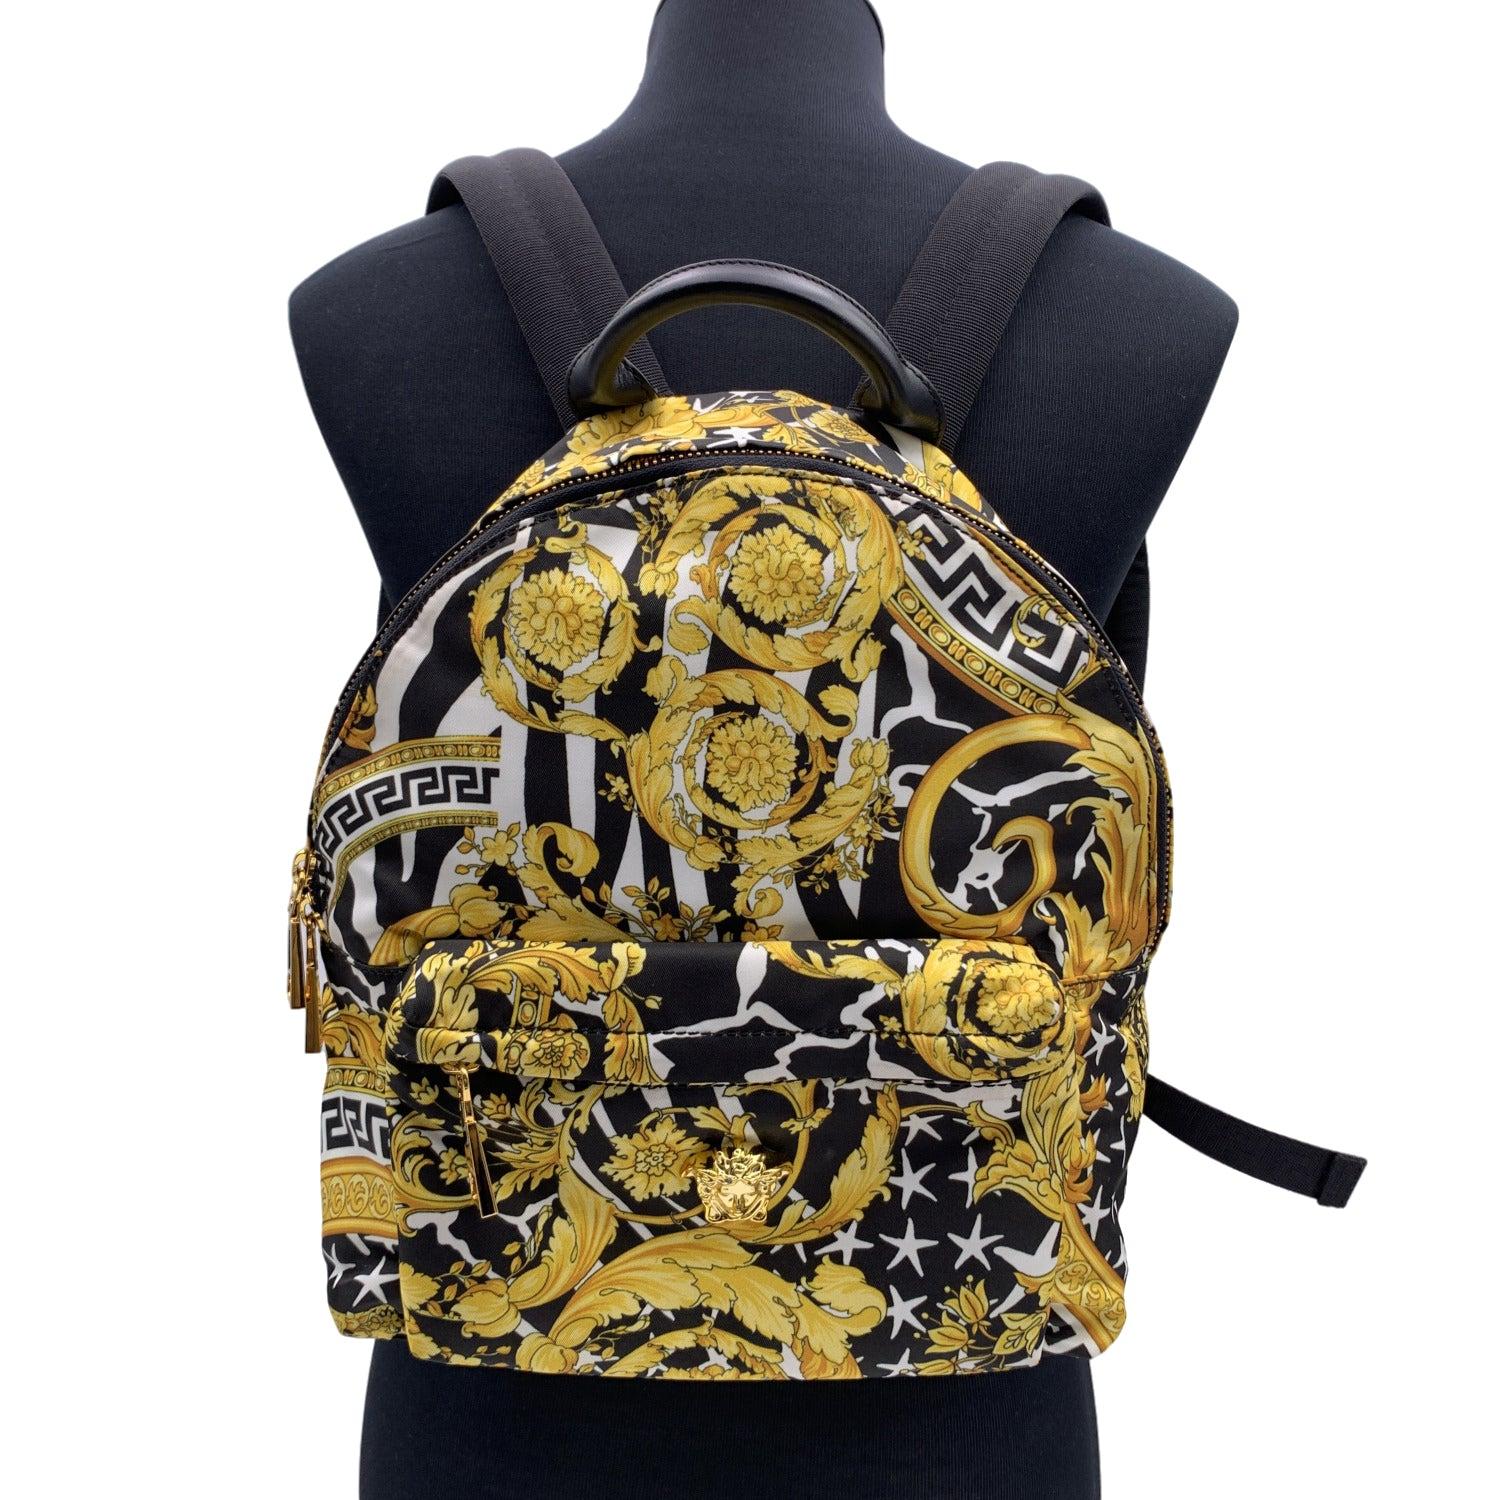 Baroque backpack by Versace. It features the iconic baroque print, a gold metal Medusa head on the front, adjustable shoulder straps, zip front exterior pocket, and a main compartment with zip fastening. Black fabric lining. 1 side zip pocket